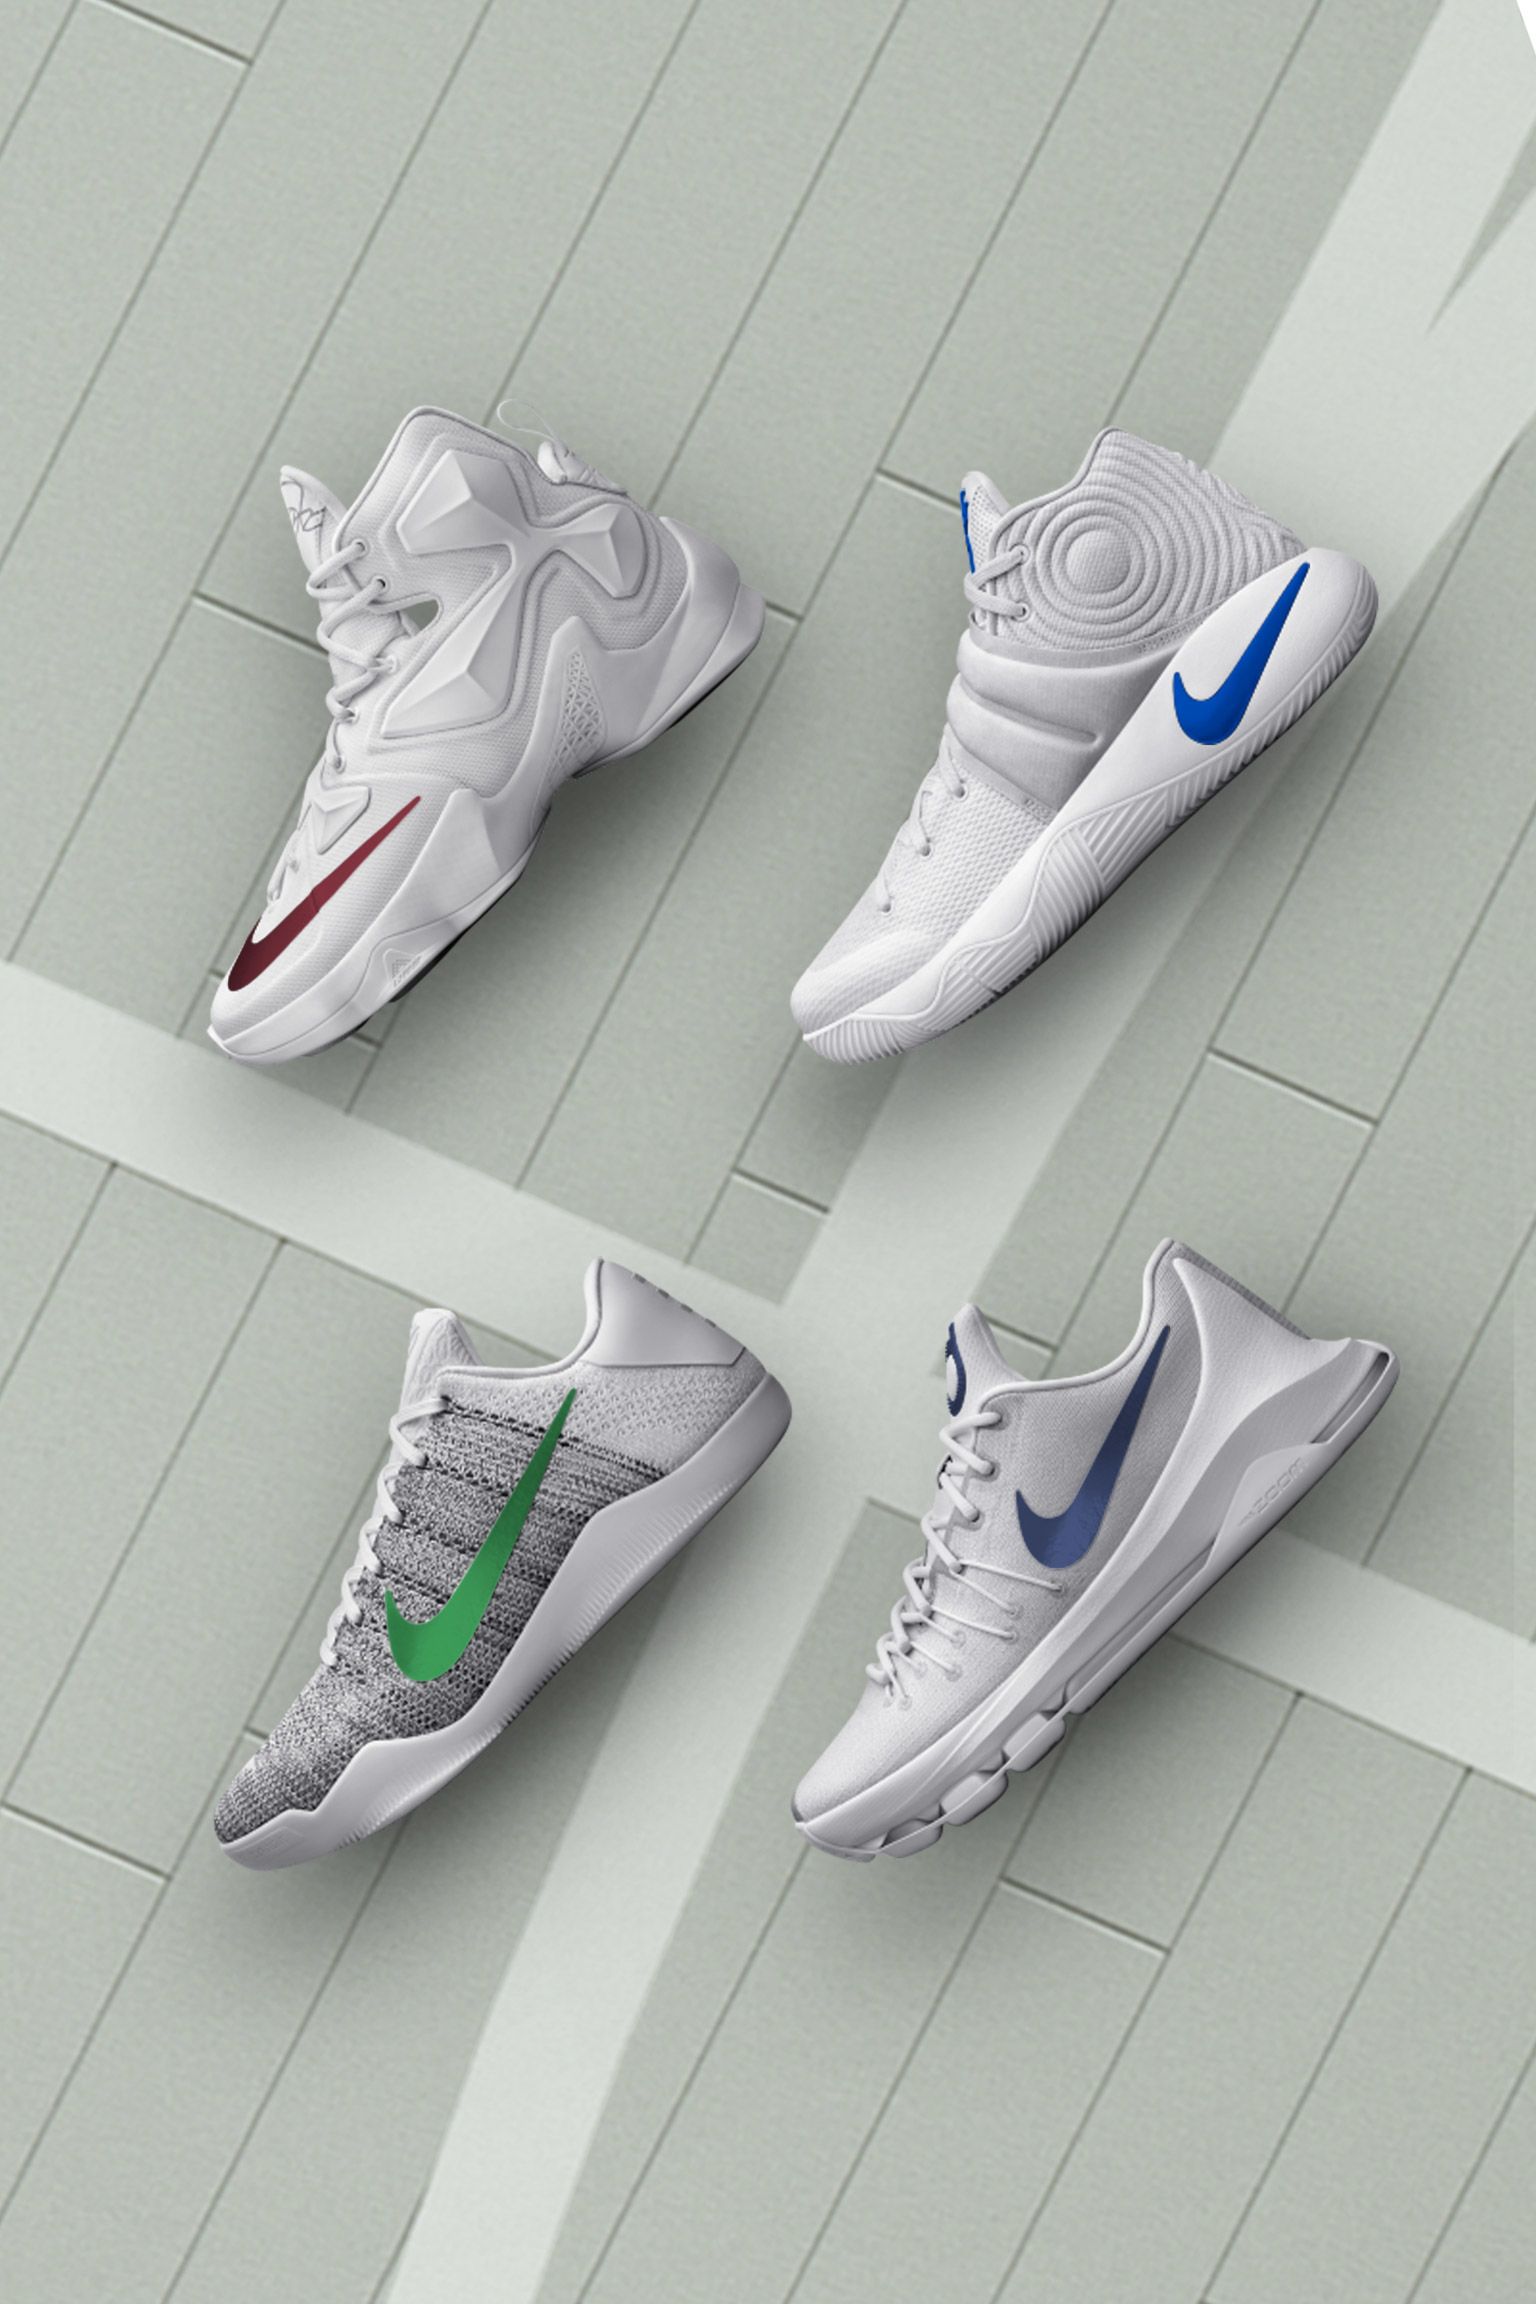 Nike Basketball: Reppin' iD Pack. Nike SNKRS